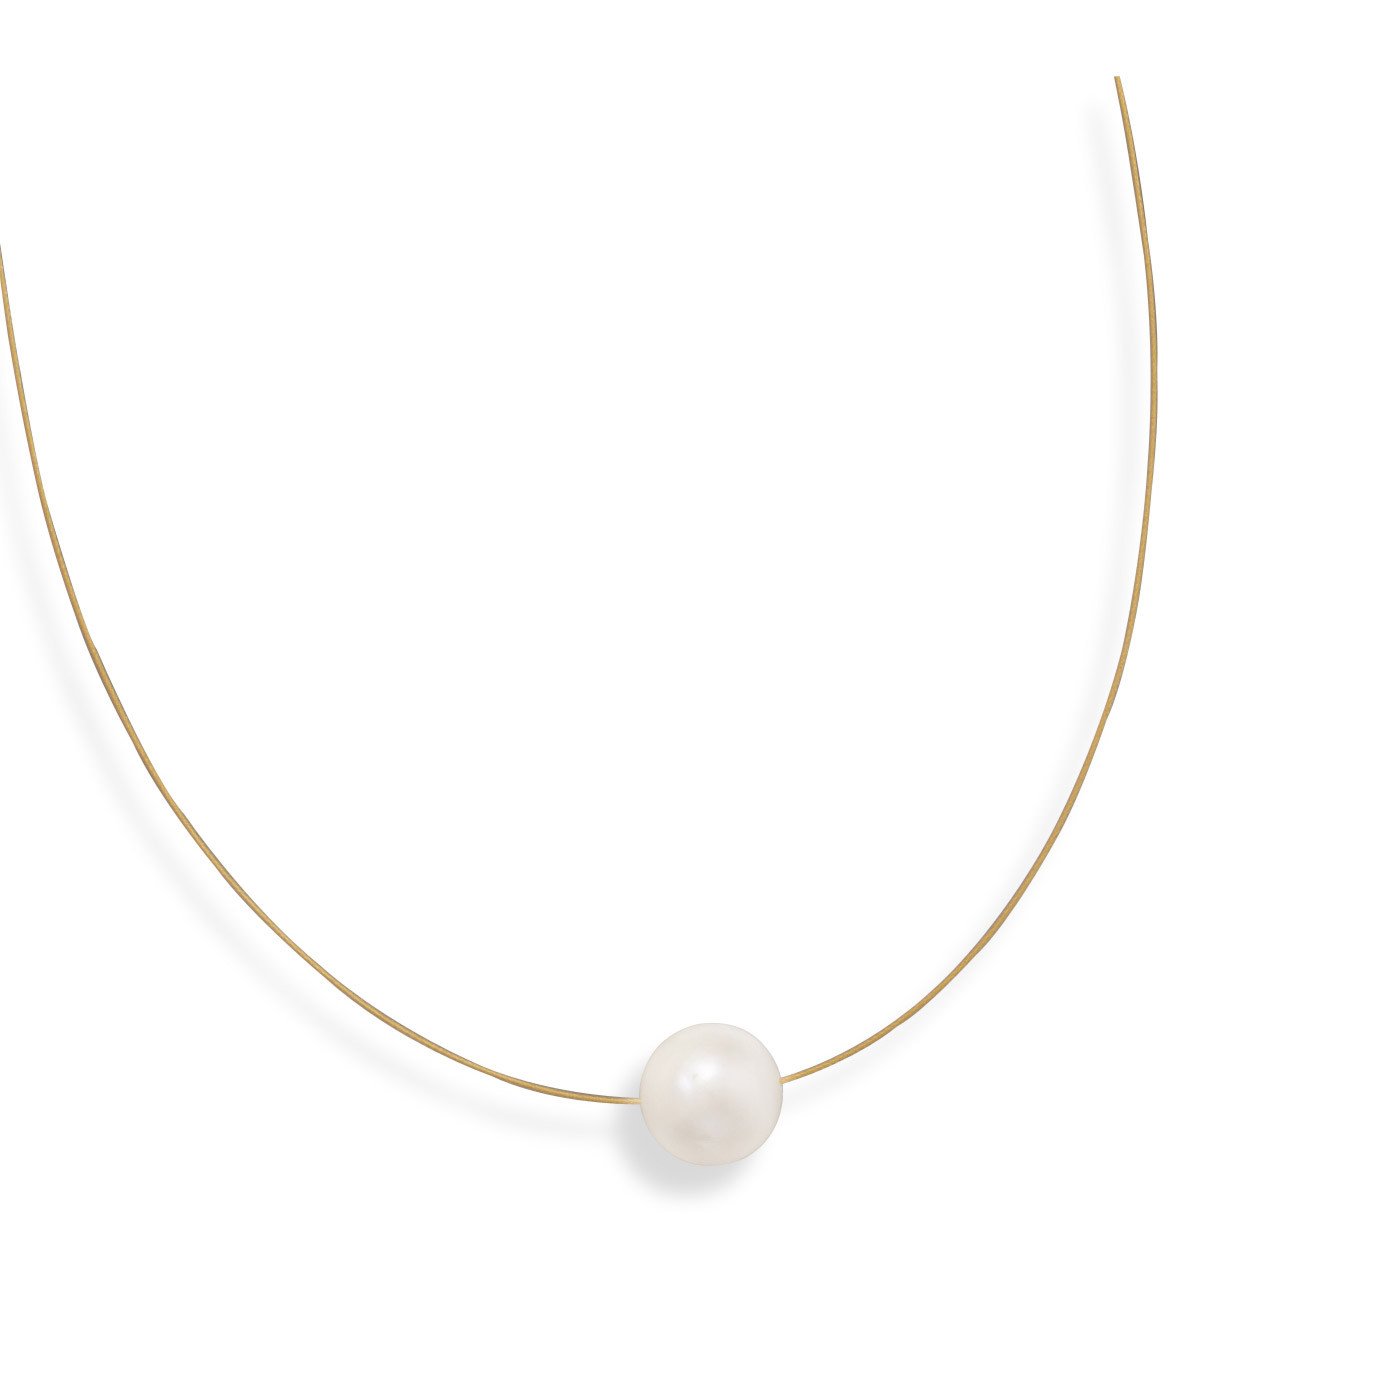 16" 24 Karat Gold Plated Necklace with Cultured Freshwater Pearl